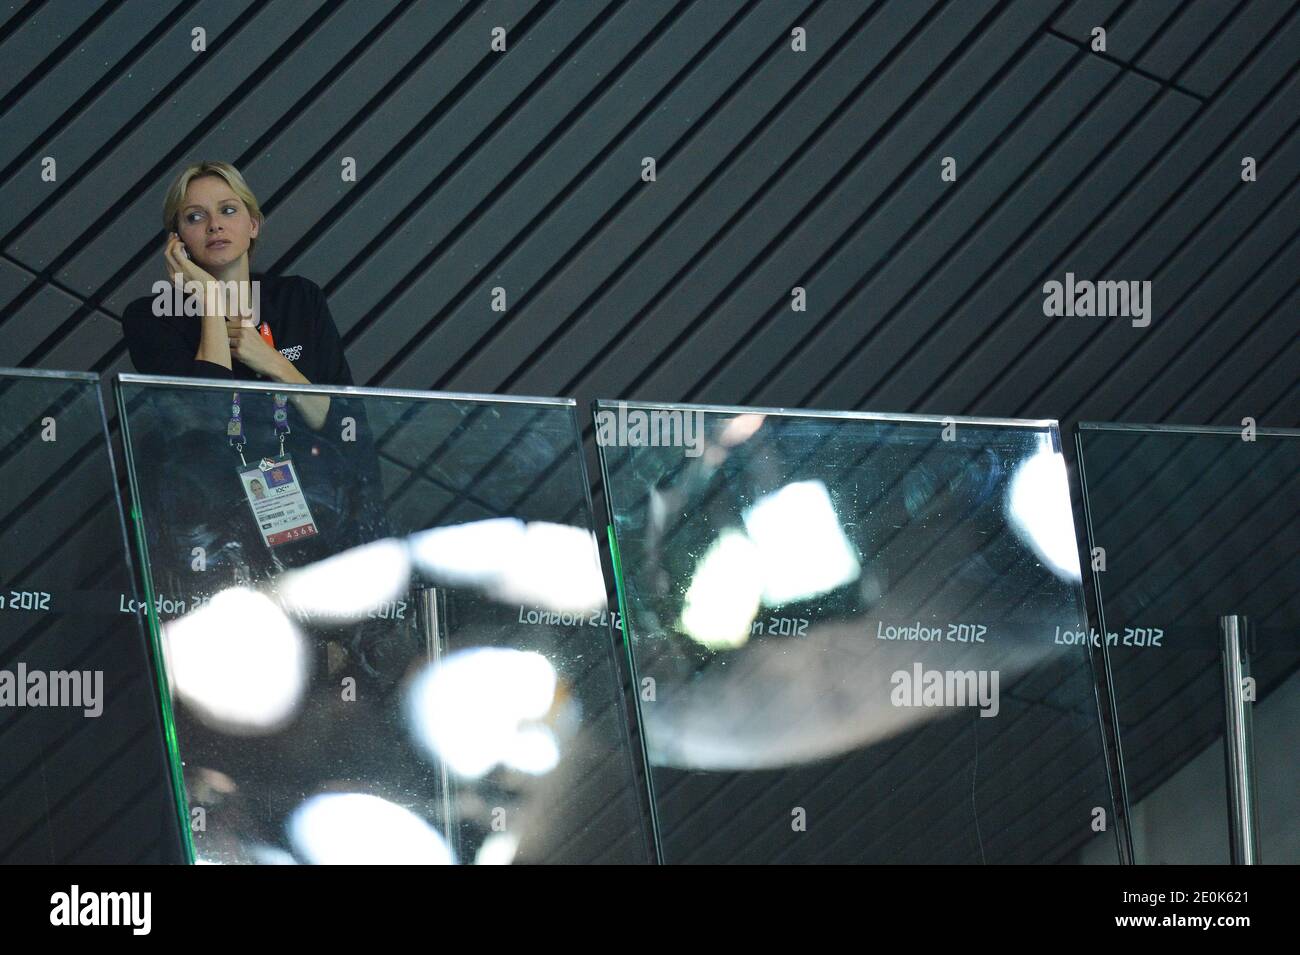 Princess Charlene of Monaco attends the Swimming Final session at the aquatic center during the 2012 London Olympics in London, UK on August 1, 2012. Photo by Gouhier-Guibbaud-JMP/ABACAPRESS.COM Stock Photo